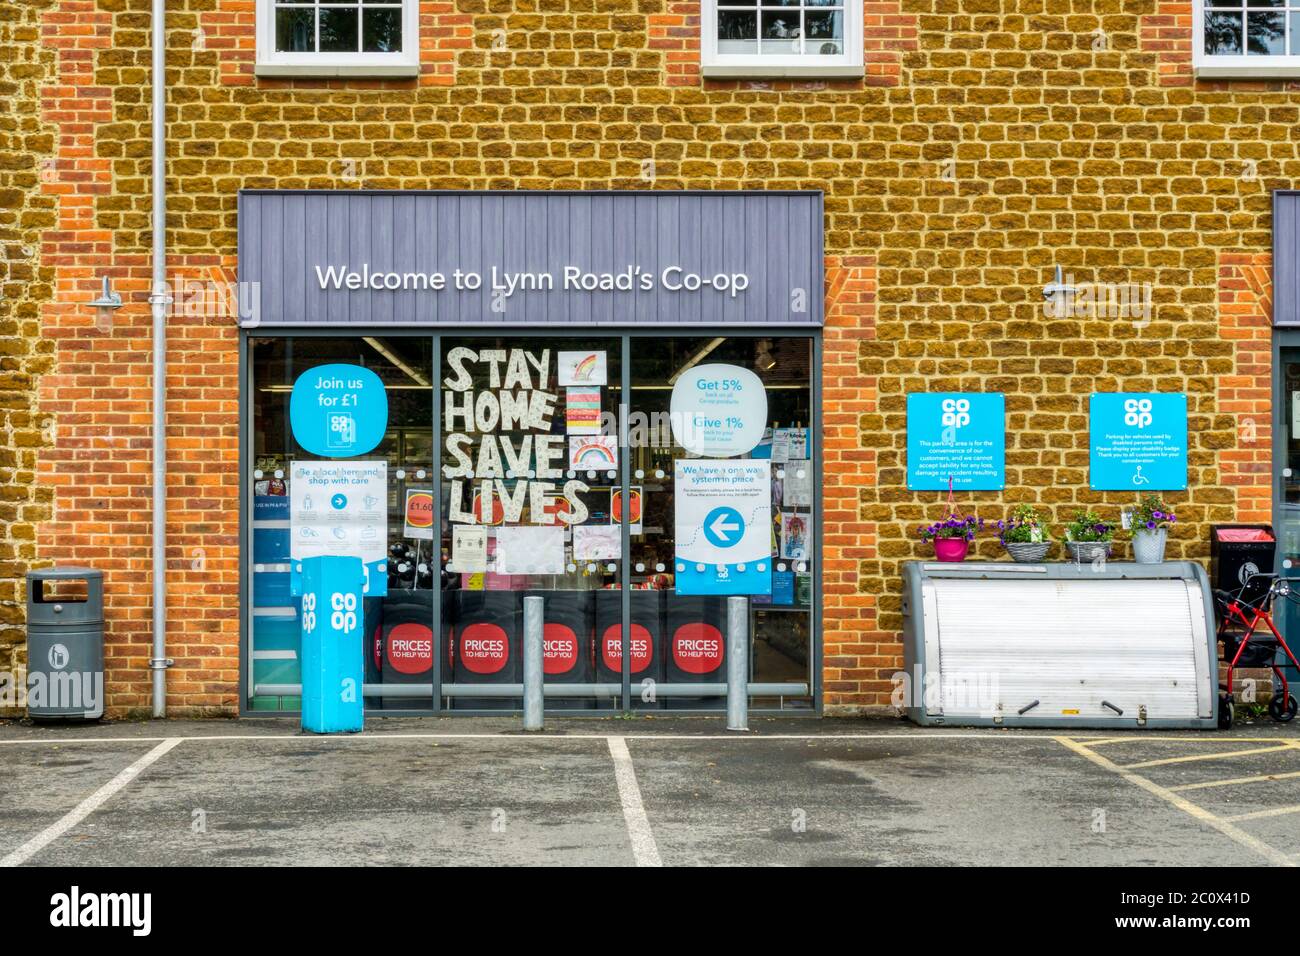 Stay Home Save Lives sign in window of a local Co-Op during 2020 COVID-19 coronavirus pandemic. Stock Photo